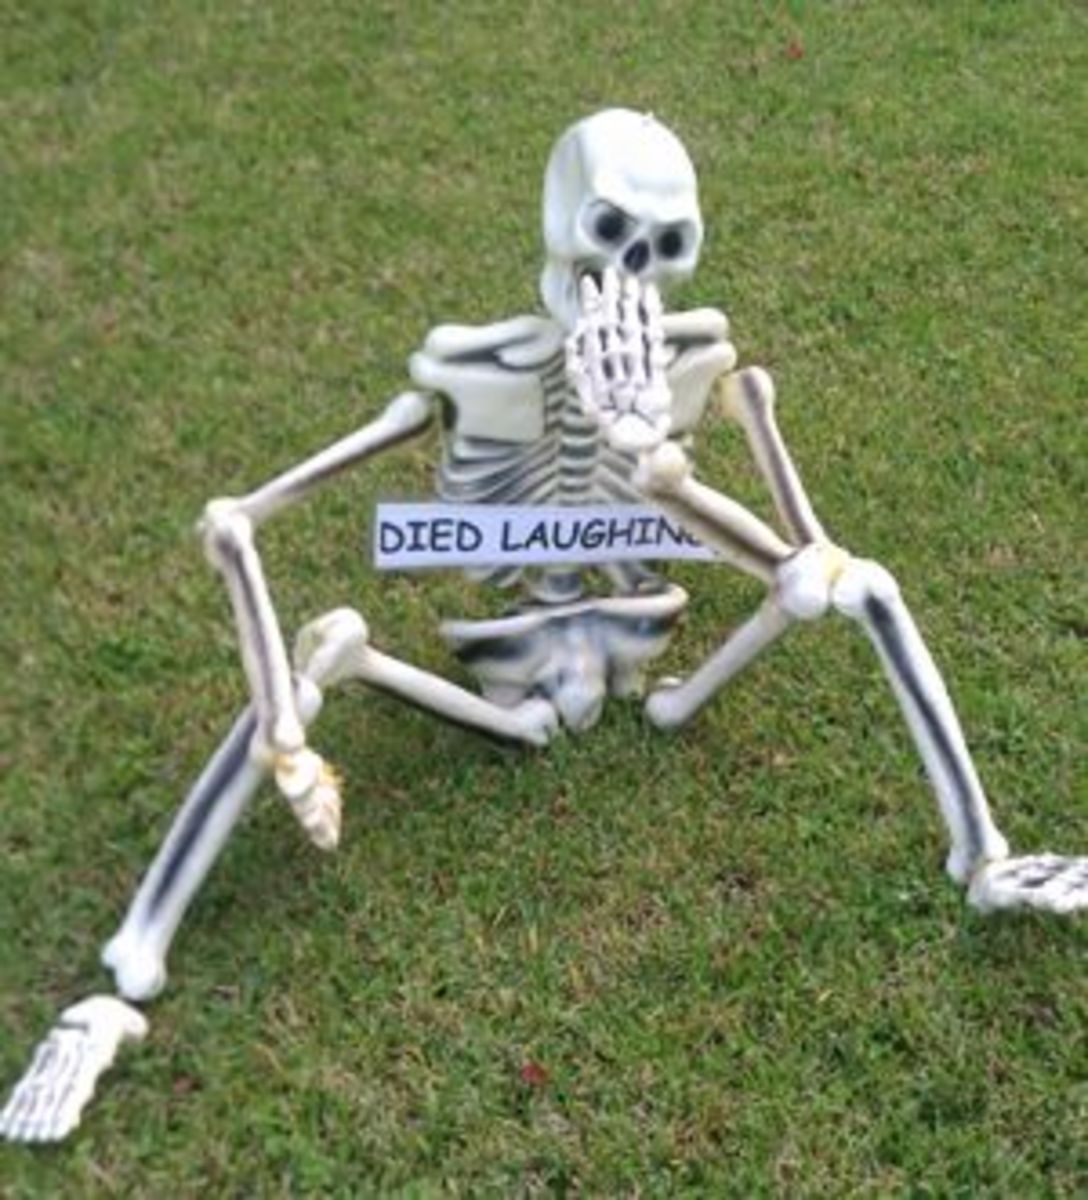 Add a "Died Laughing" sign and give your skeleton a funny pose for a simple but effective decoration.